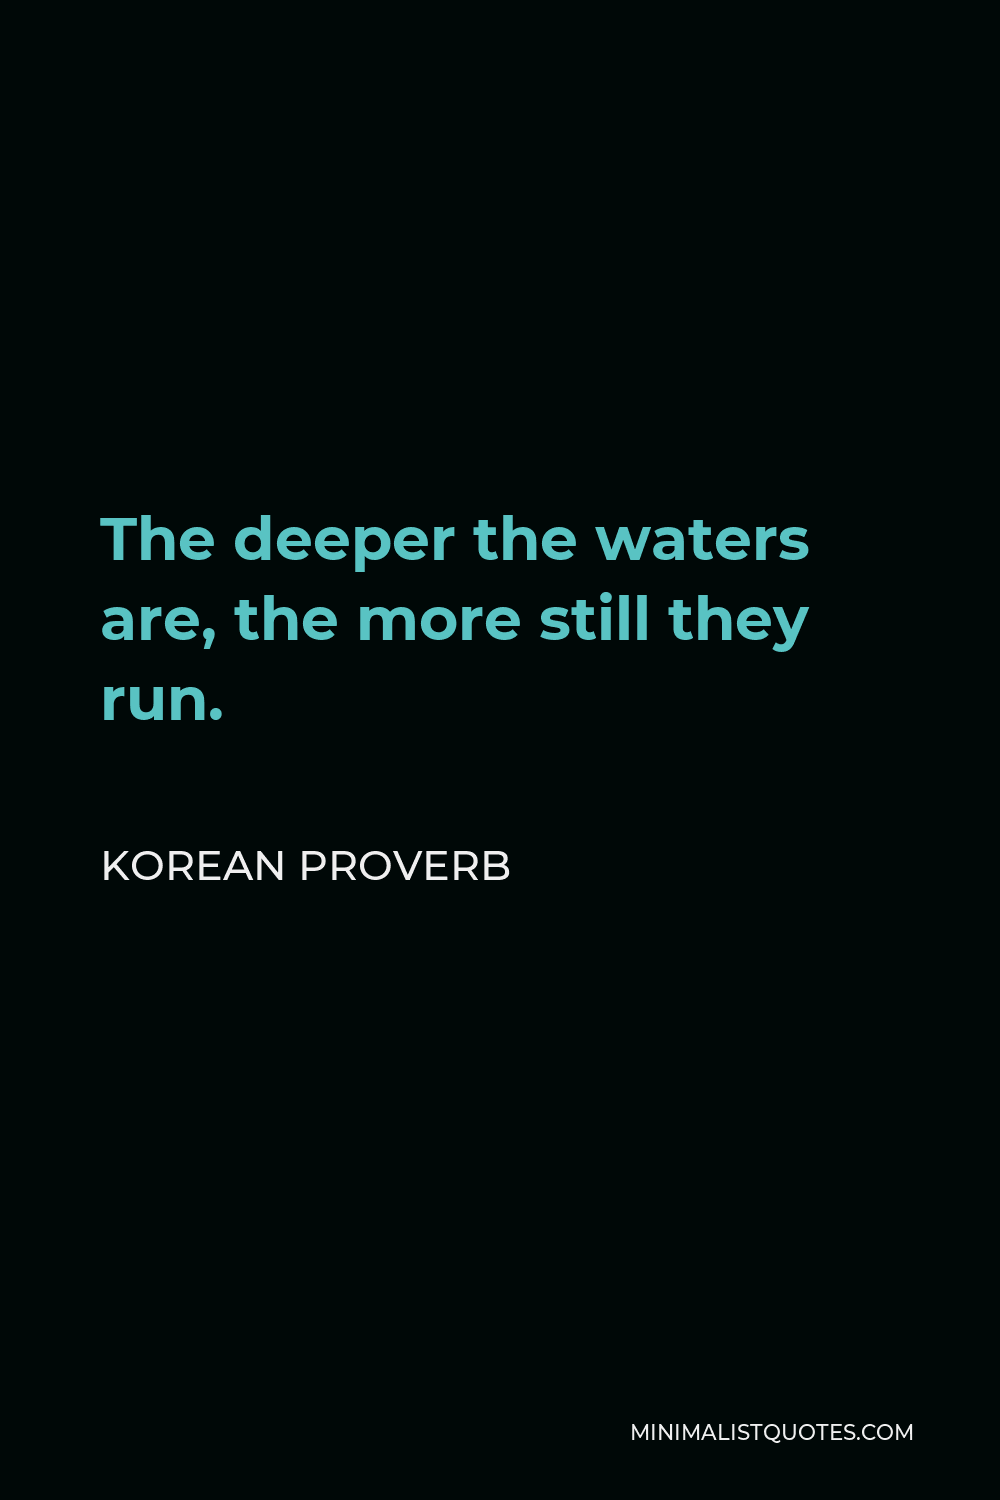 Korean Proverb Quote - The deeper the waters are, the more still they run.